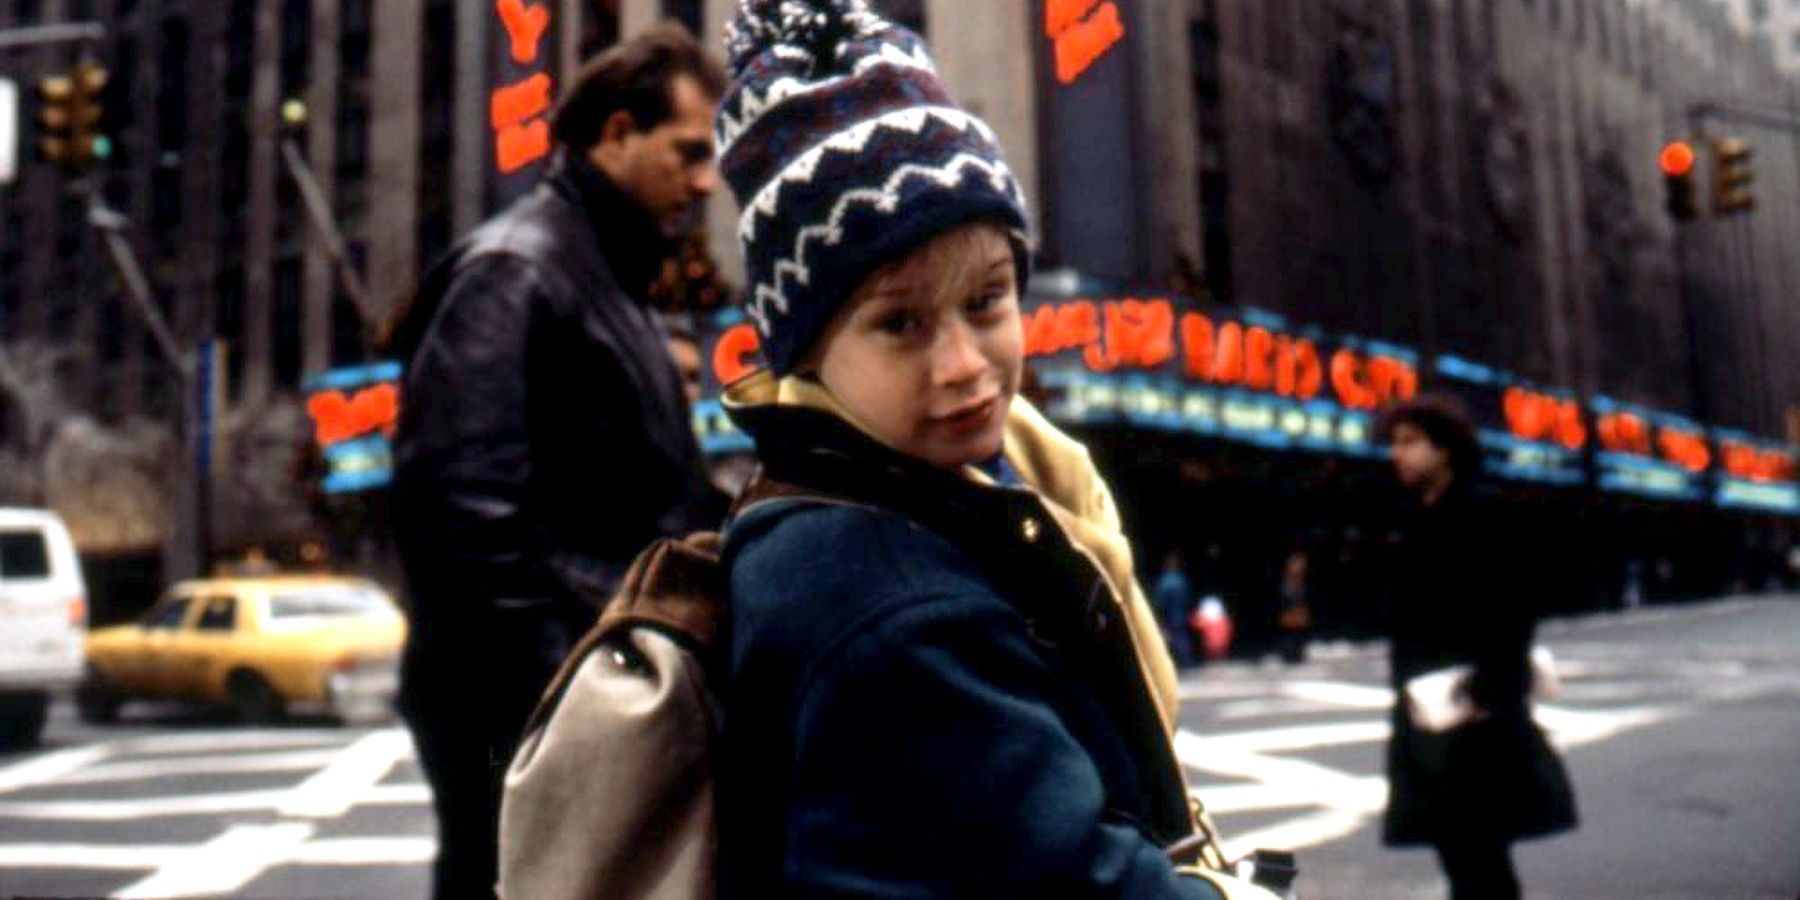 Kevin walks down the street in Home Alone 2